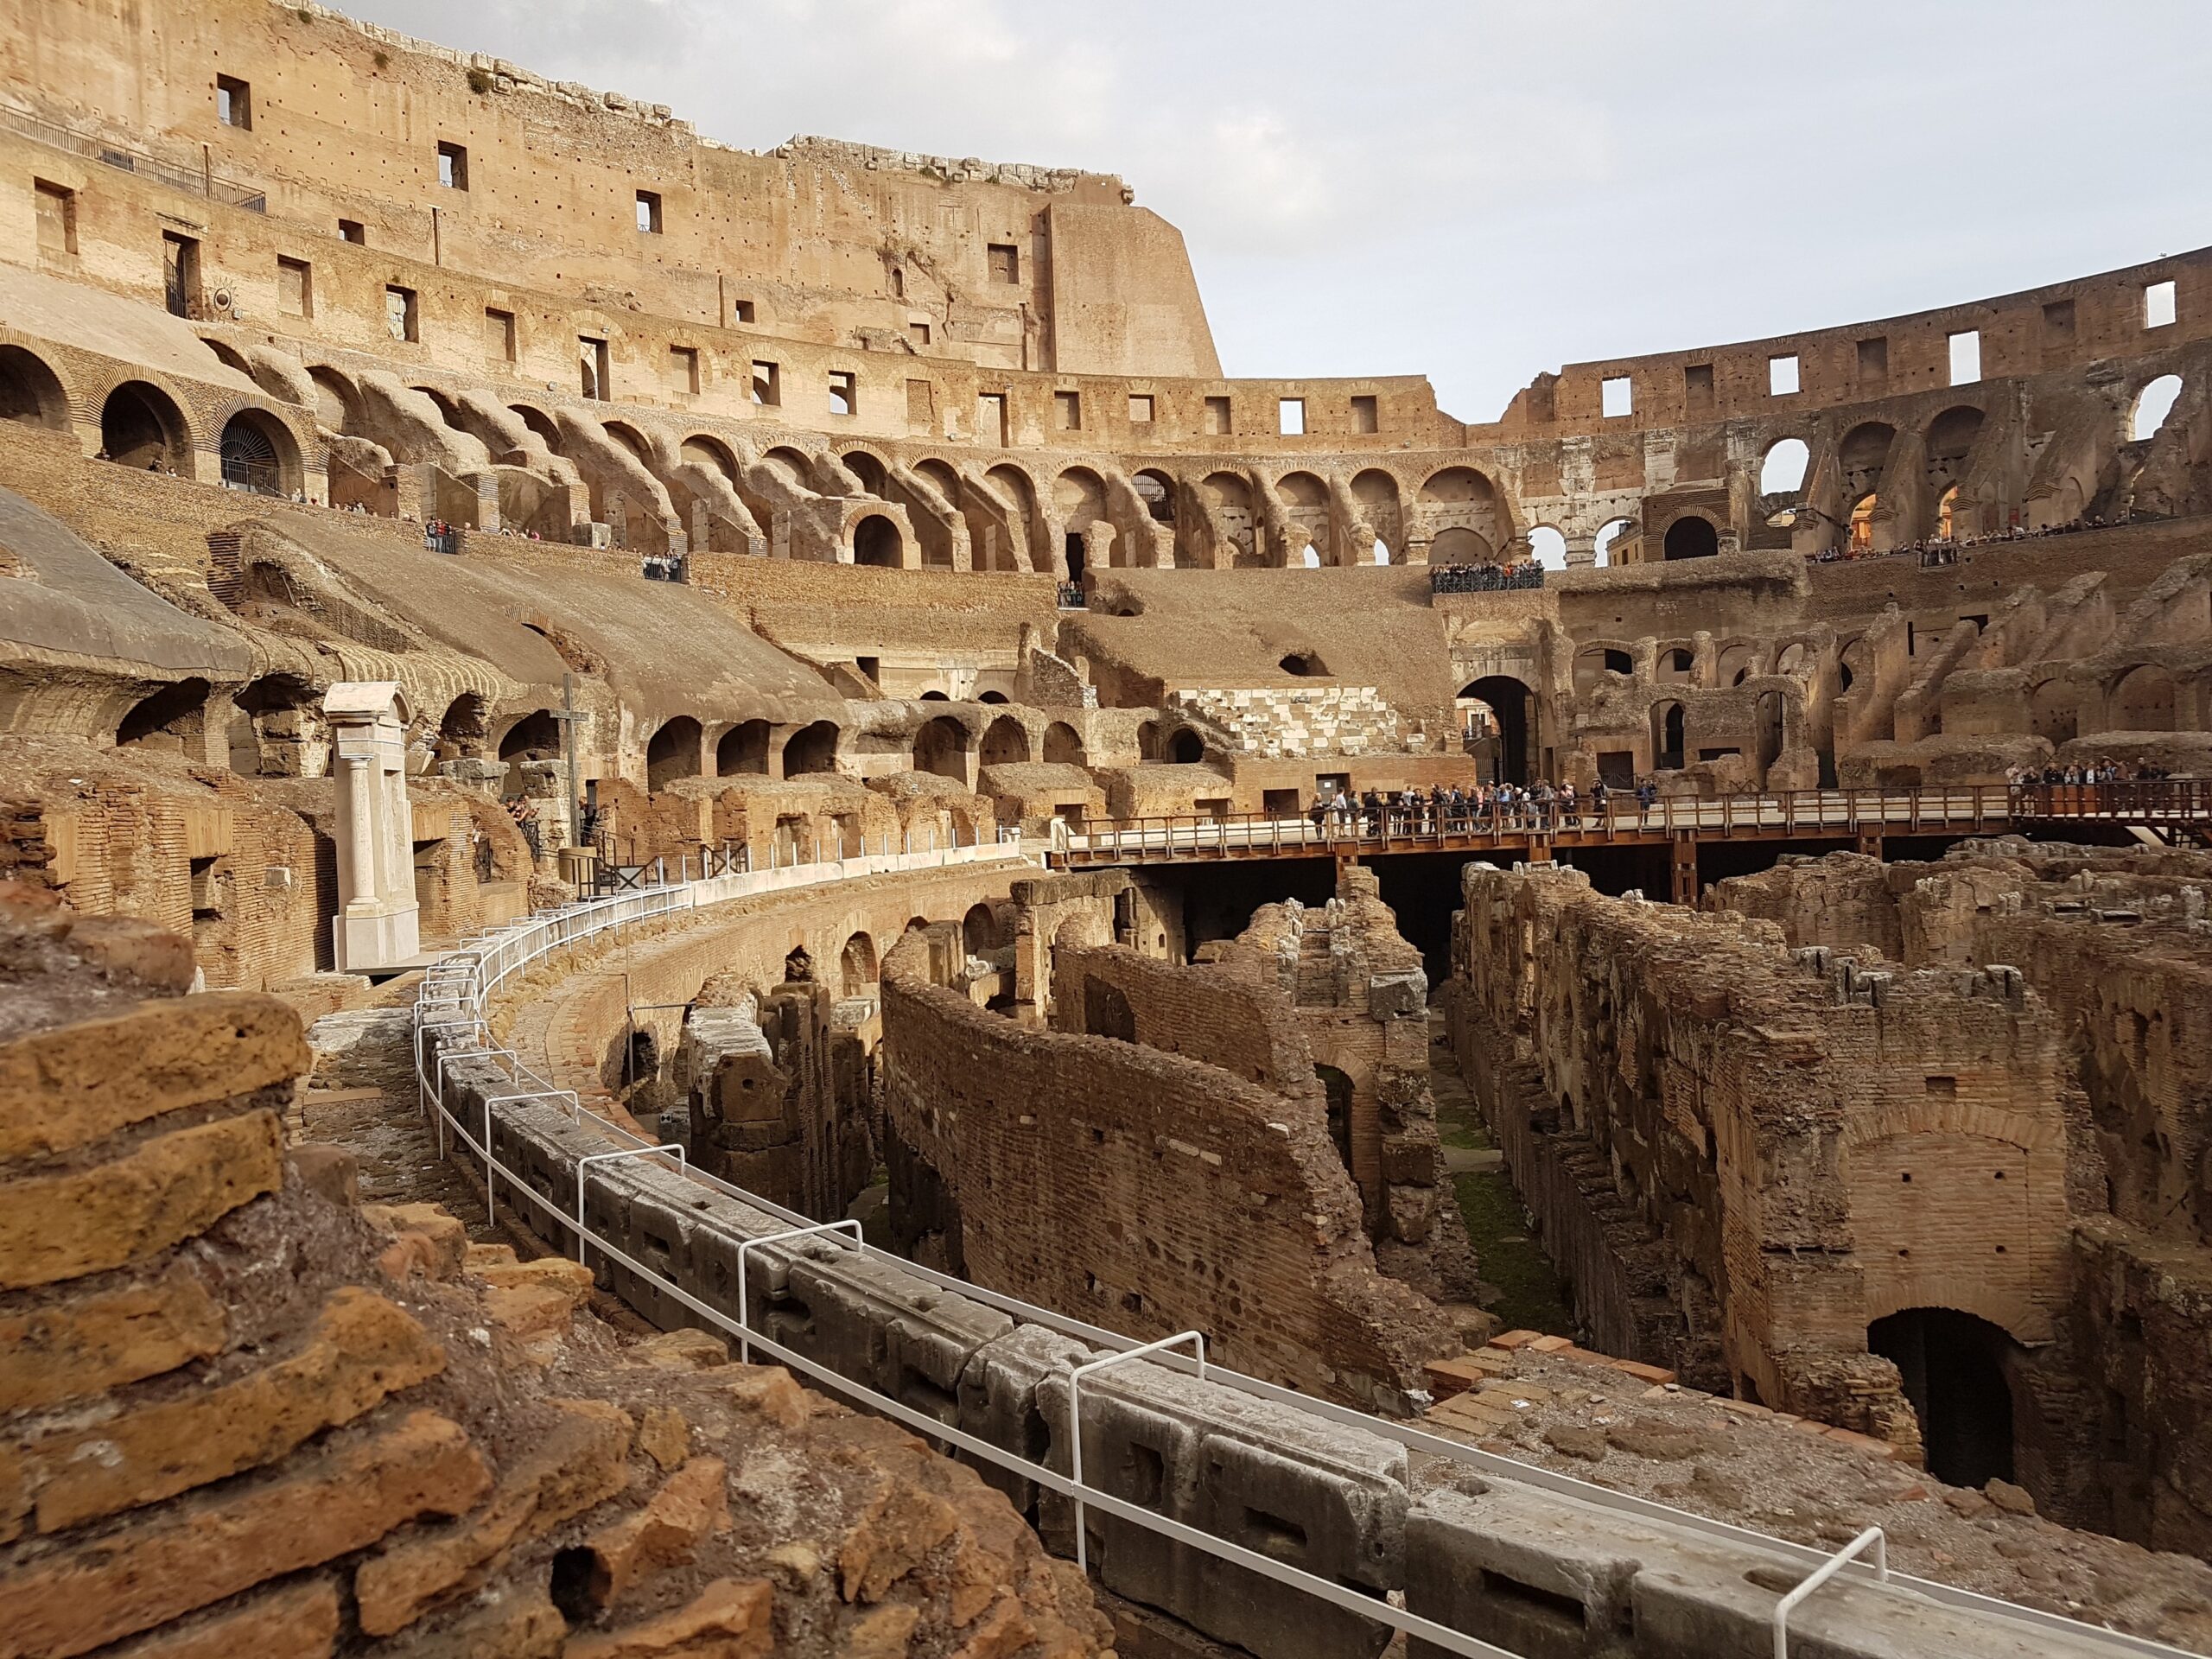 The Colosseum of Rome is an iconic site that still attracts a large amount of tourists due to its jaw dropping architecture and historical significance.
pictured: the Colosseum of Rome, Italy from the interior 